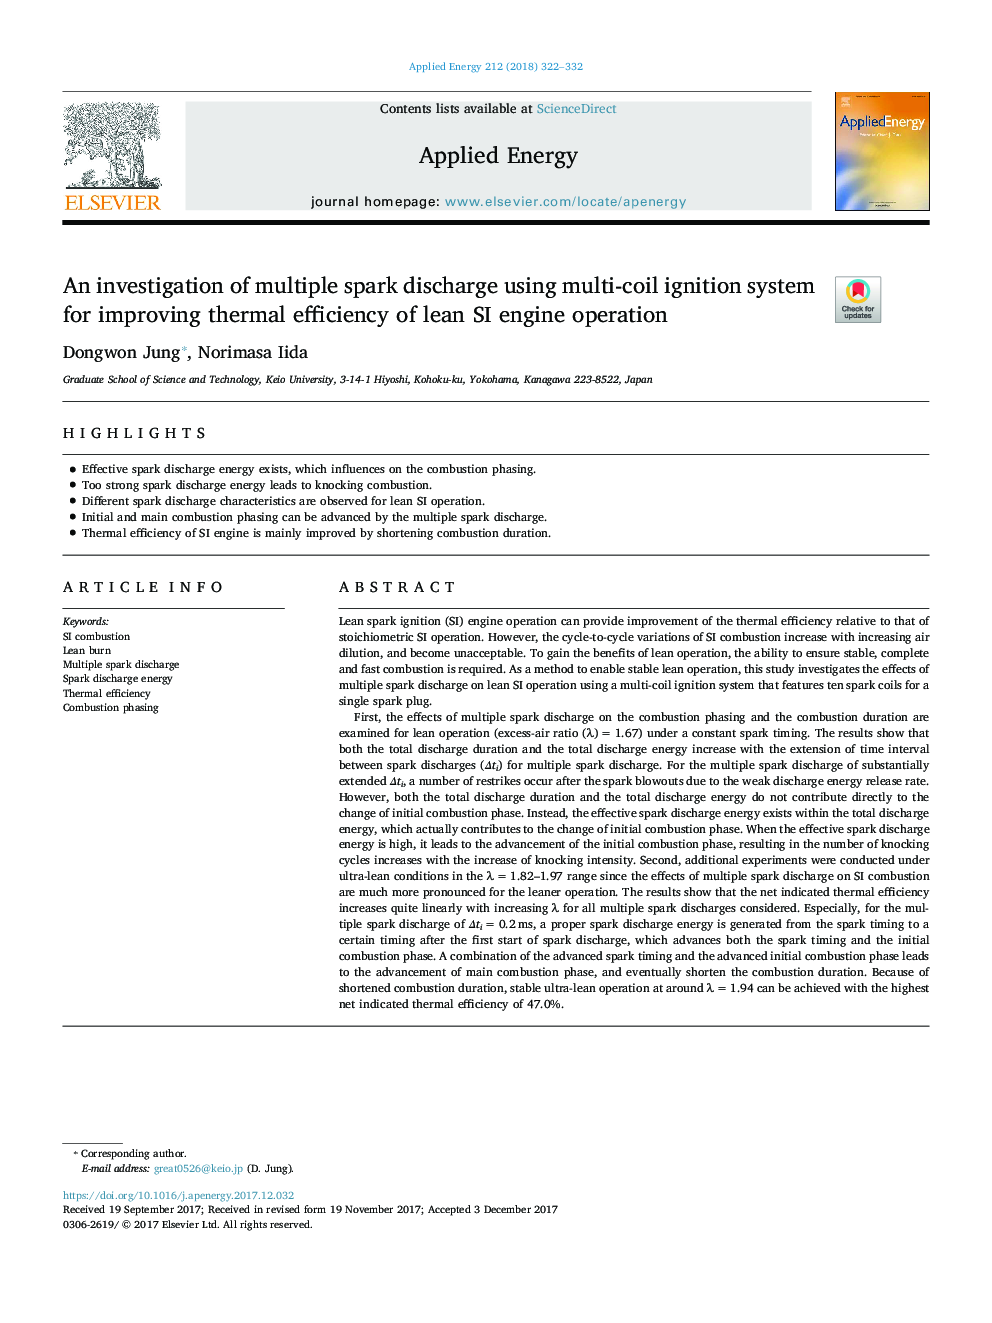 An investigation of multiple spark discharge using multi-coil ignition system for improving thermal efficiency of lean SI engine operation